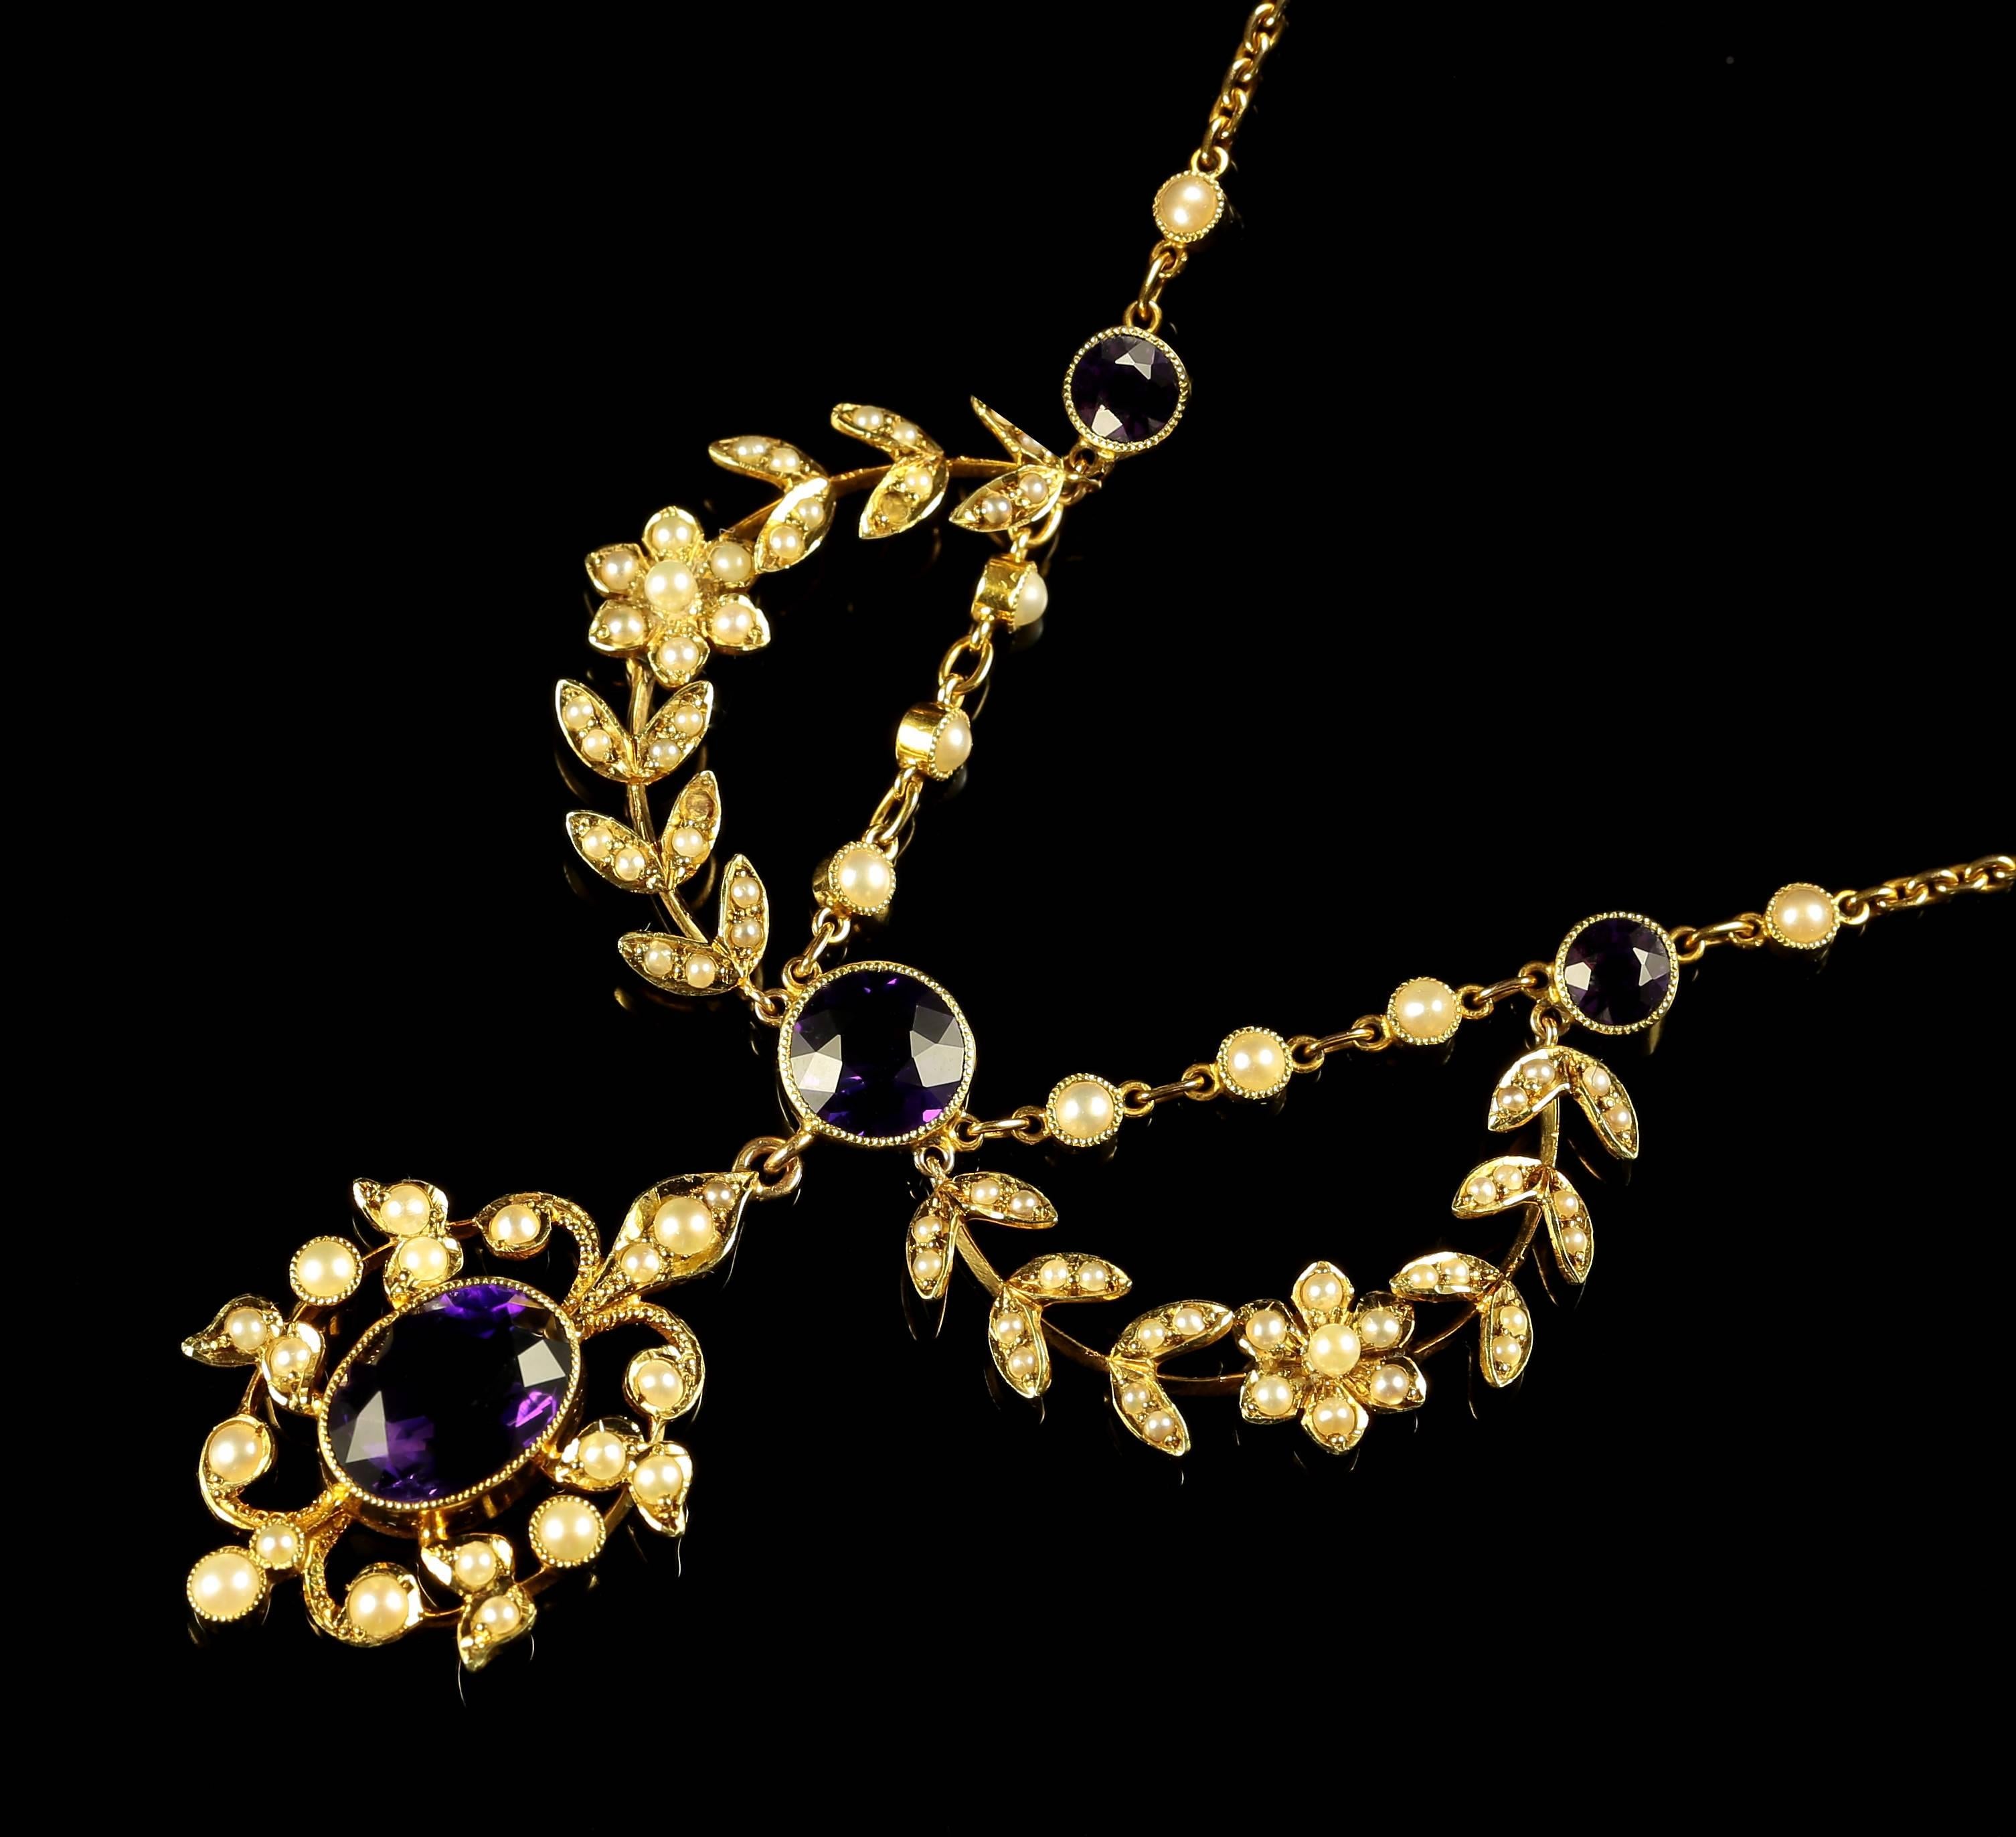 This fabulous 15ct yellow gold Victorian necklace is adorned with rich velvet Amethysts and lustrous Pearls.

Circa 1880 this really is beautiful, ideal for a wedding.

The central rich purple amethyst is 3.70ct the top amethyst measures 1.60ct

The